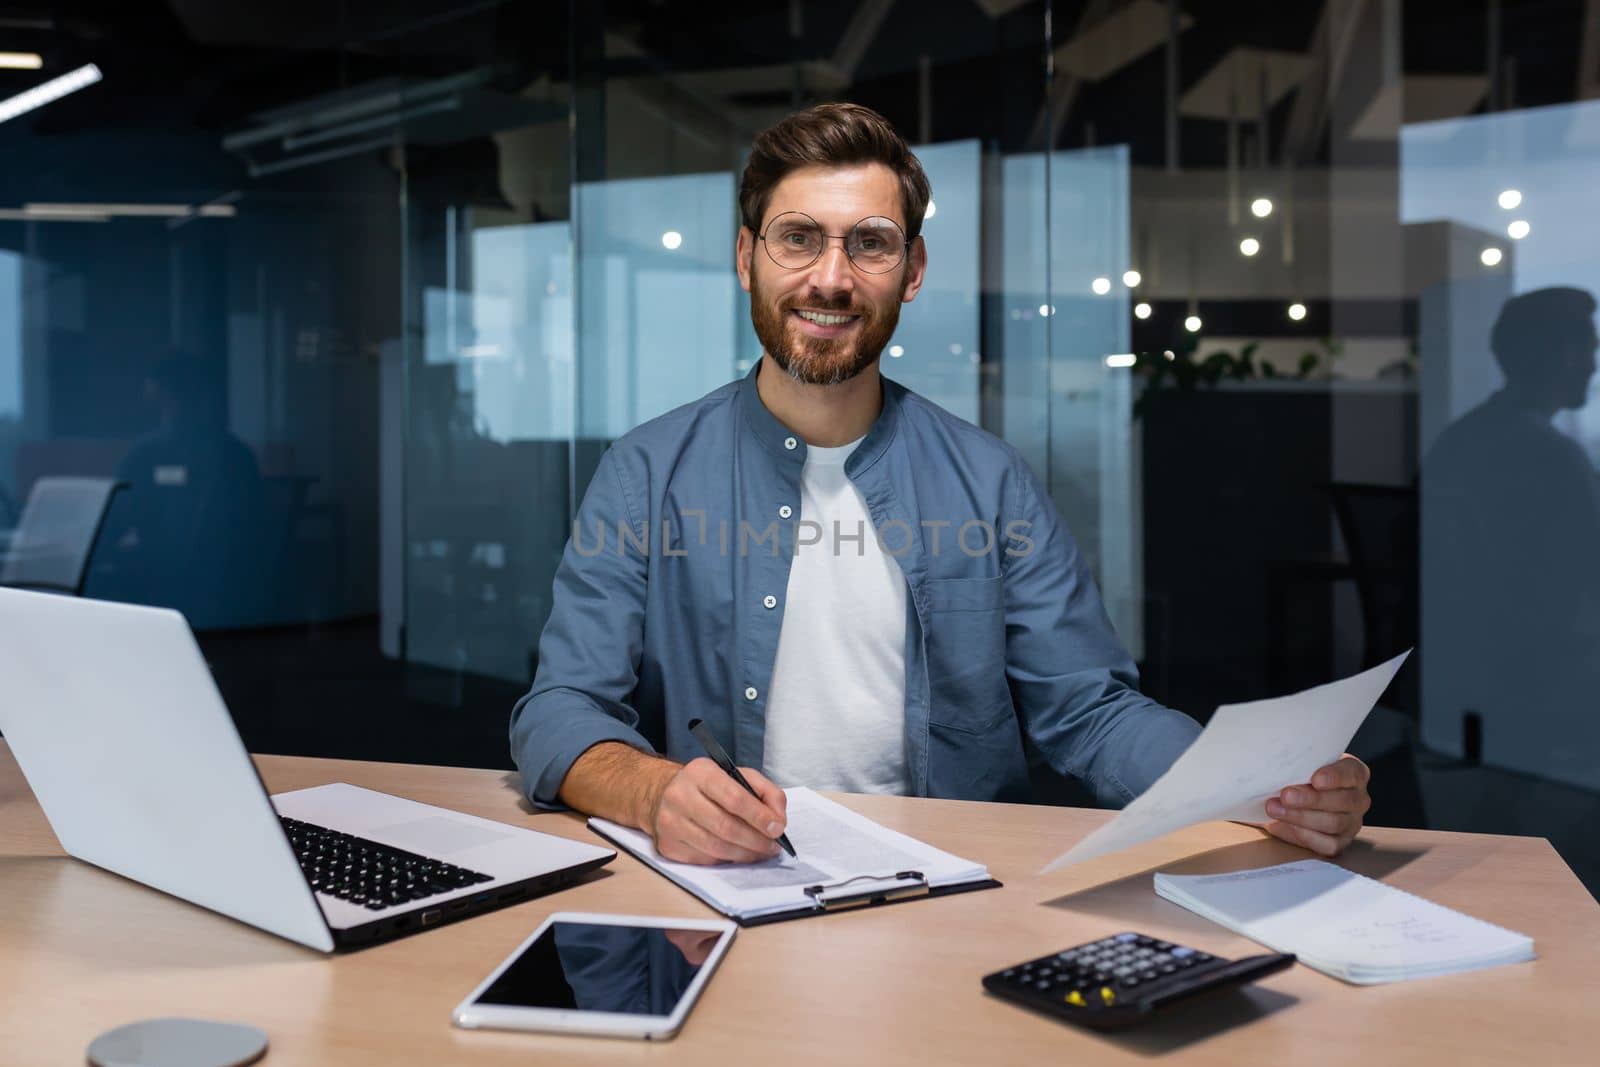 Portrait of a young handsome man, freelancer, businessman, accountant. Sitting in the office, looking at the camera, smiling. Works on a laptop, with documents, fills in forms with a pen.